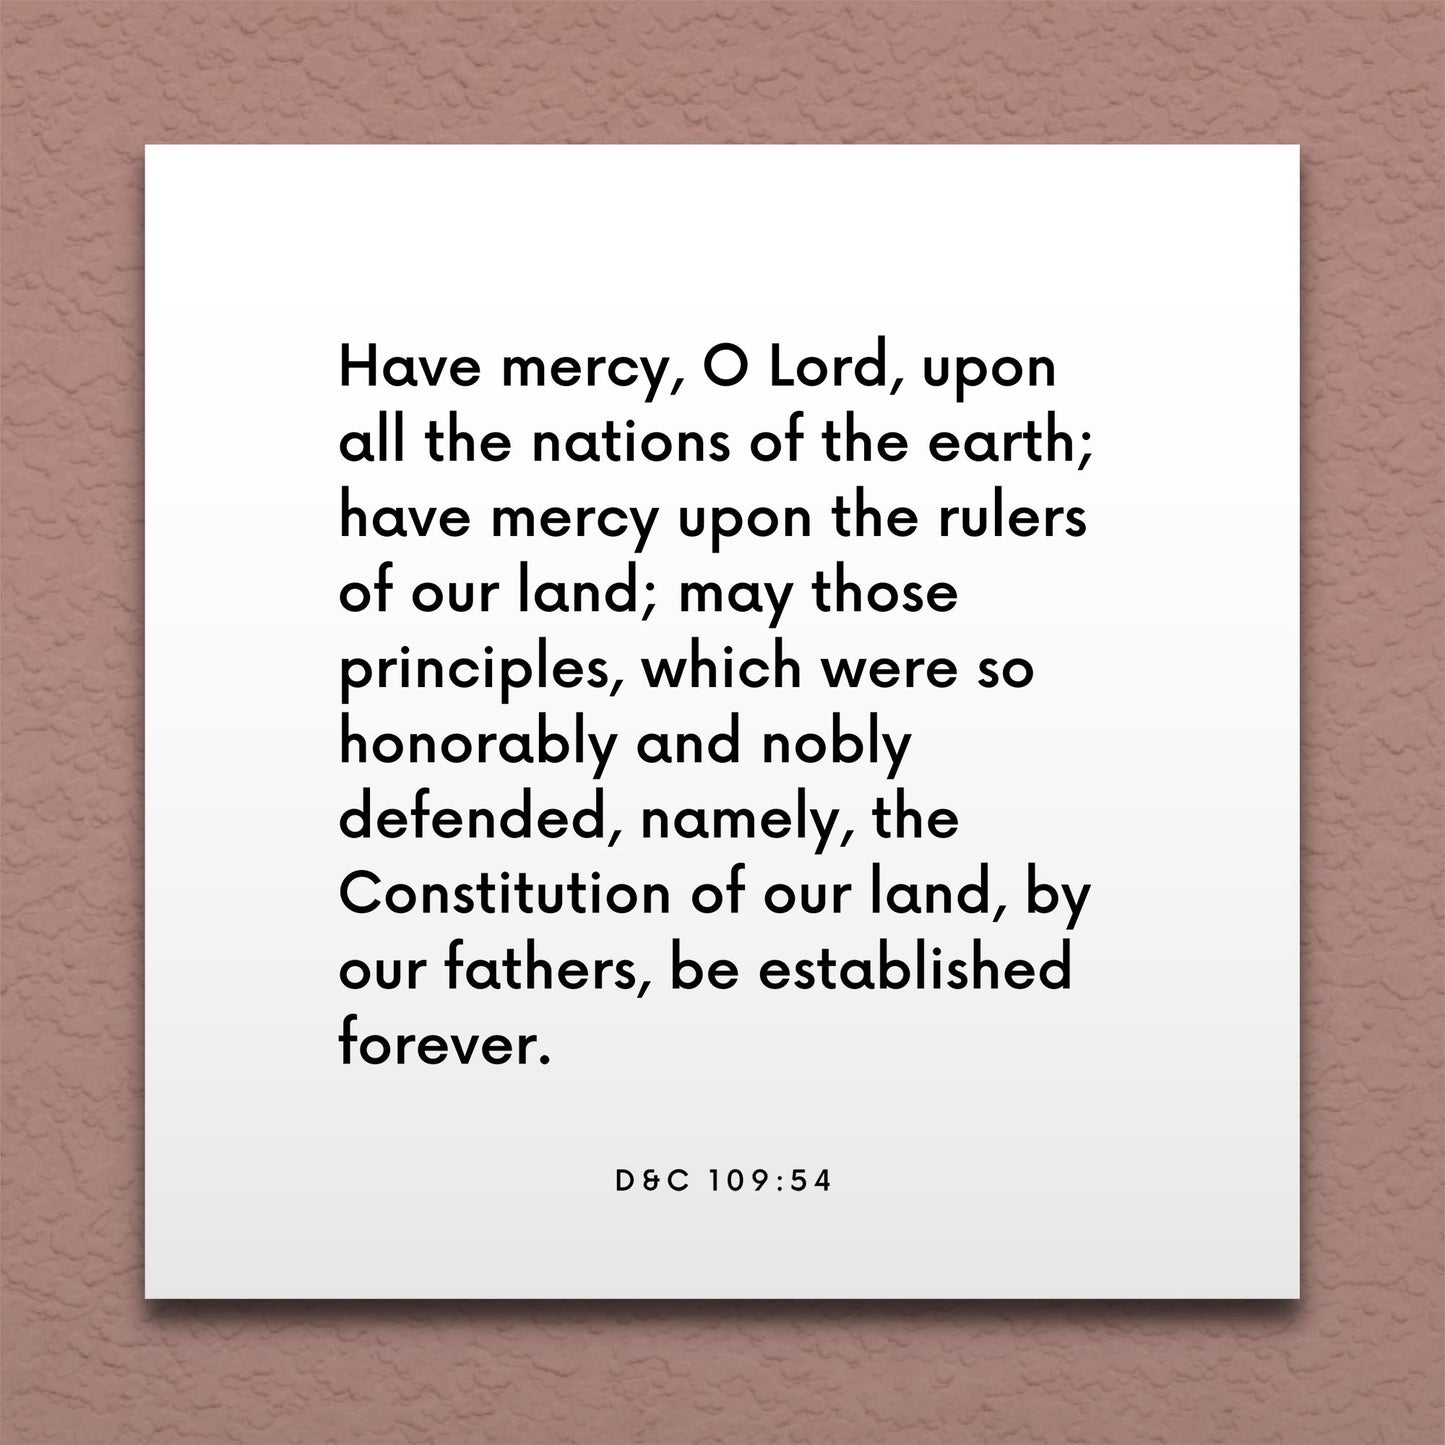 Wall-mounted scripture tile for D&C 109:54 - "May the Constitution of our land be established forever"